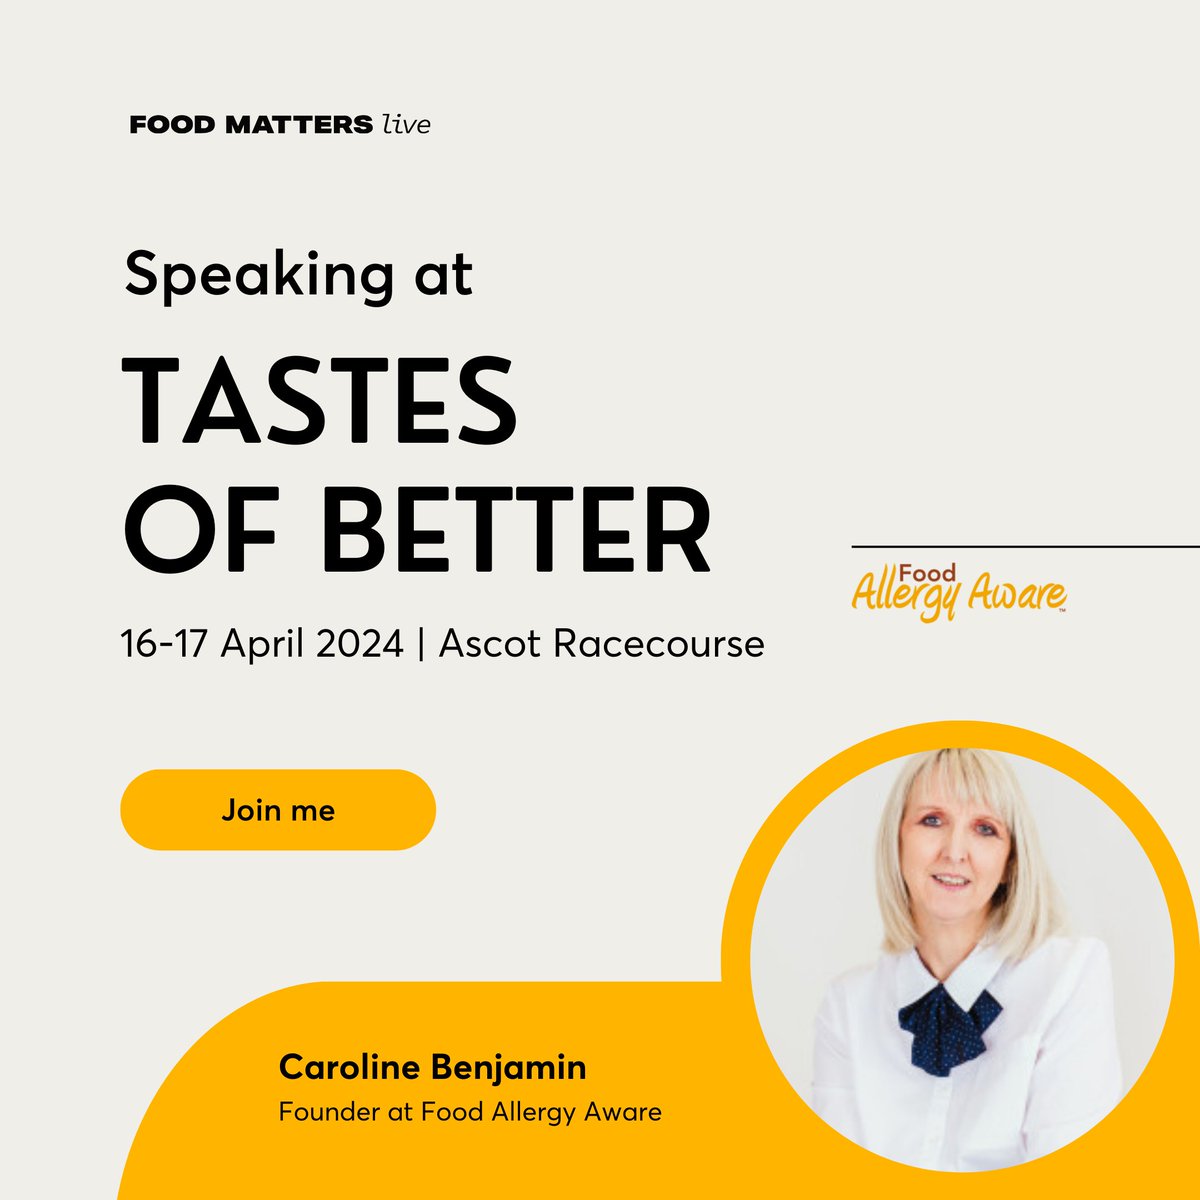 I'm excited to share that I'll be speaking at the upcoming Food Matters Live event, Tastes of Better on April 16th-17th. Reserve your spot now to delve into the exciting ingredient innovations of 2024! bit.ly/43NK6ys #TastesofBetter @FoodMattersLive #fooddevelopment